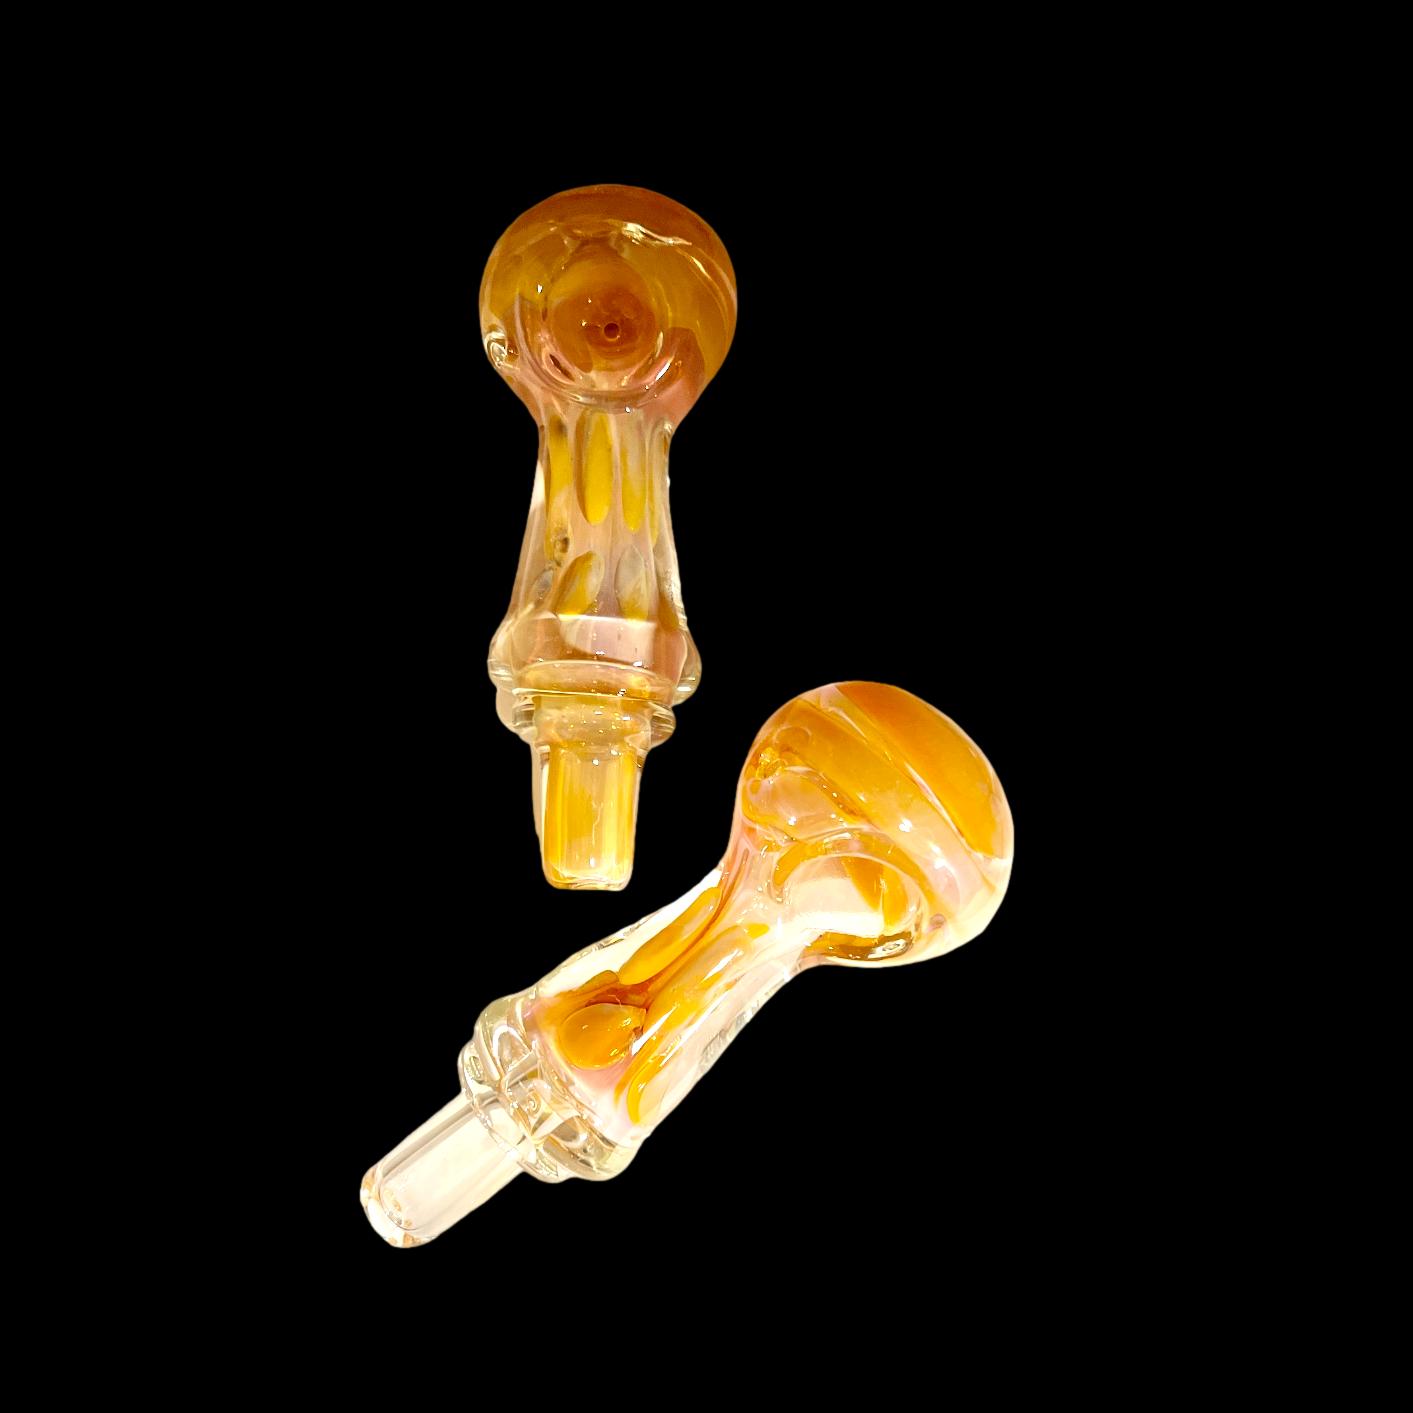 5'' Triple Rim Full Fumed Glass Hand Pipe – a mesmerizing and artisanal smoking accessory that showcases intricate fuming techniques.